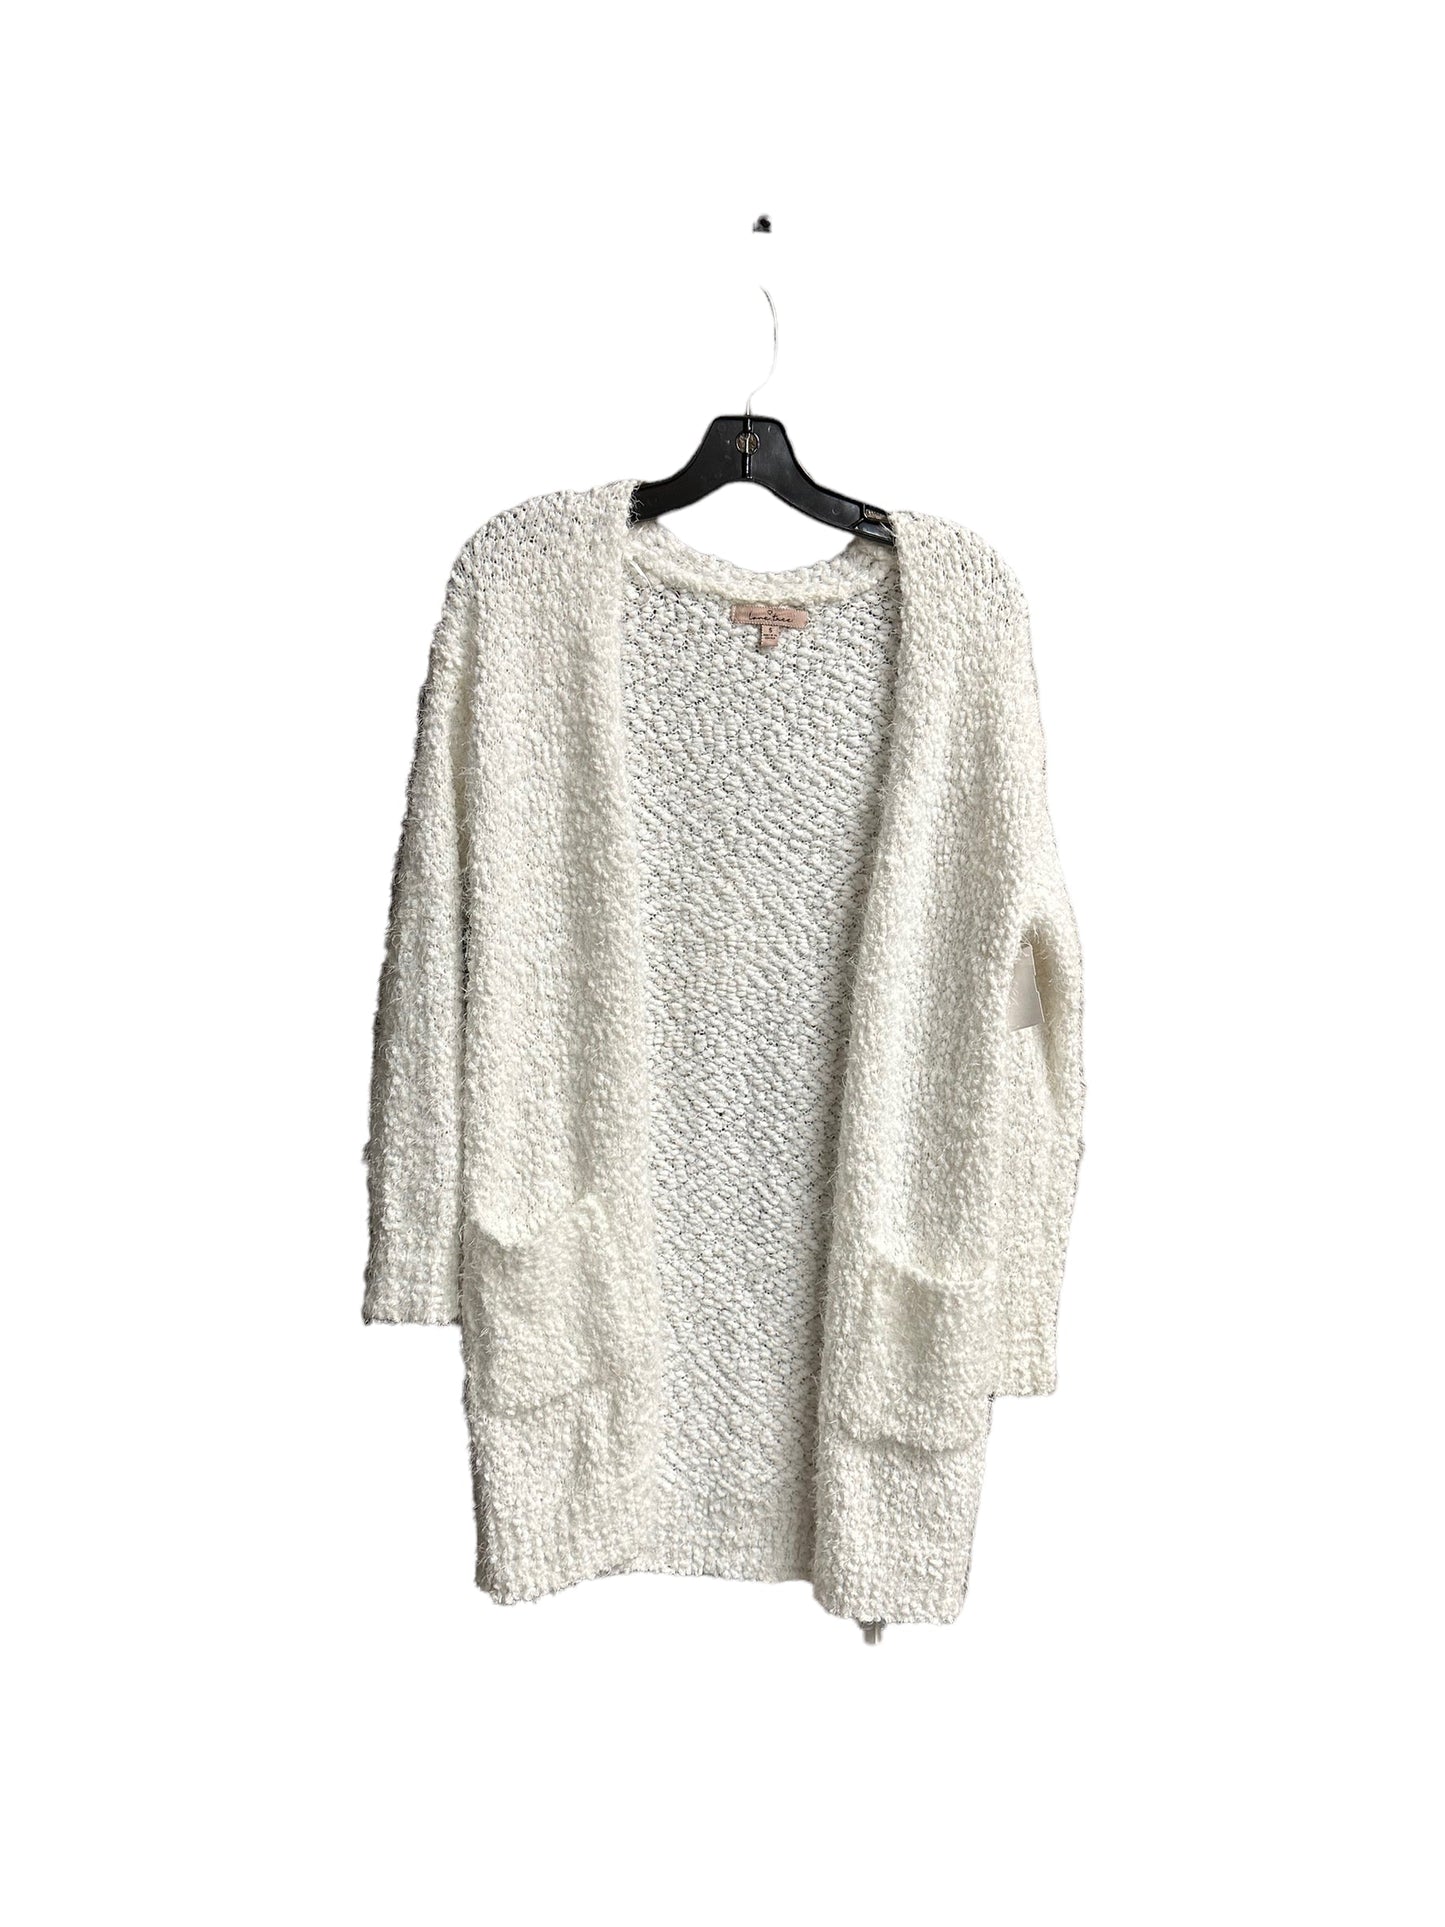 Sweater Cardigan By Love Tree  Size: S